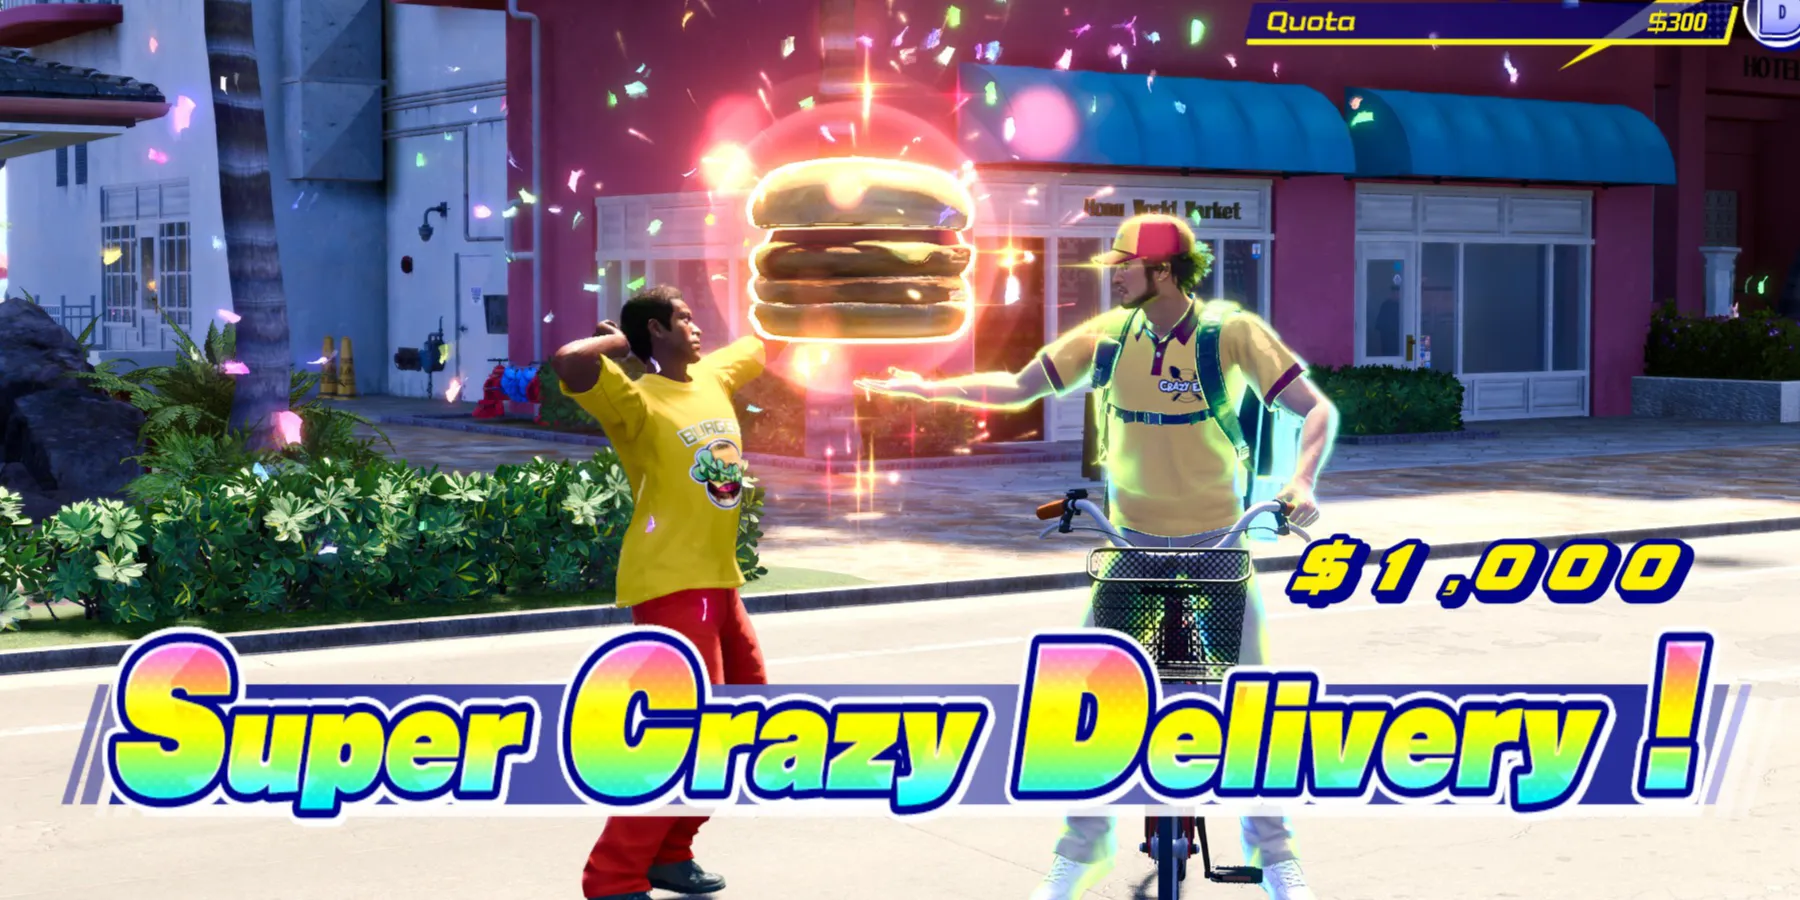 Like A Dragon Infinite Wealth Crazy Delivery Tips Super Crazy Delivery